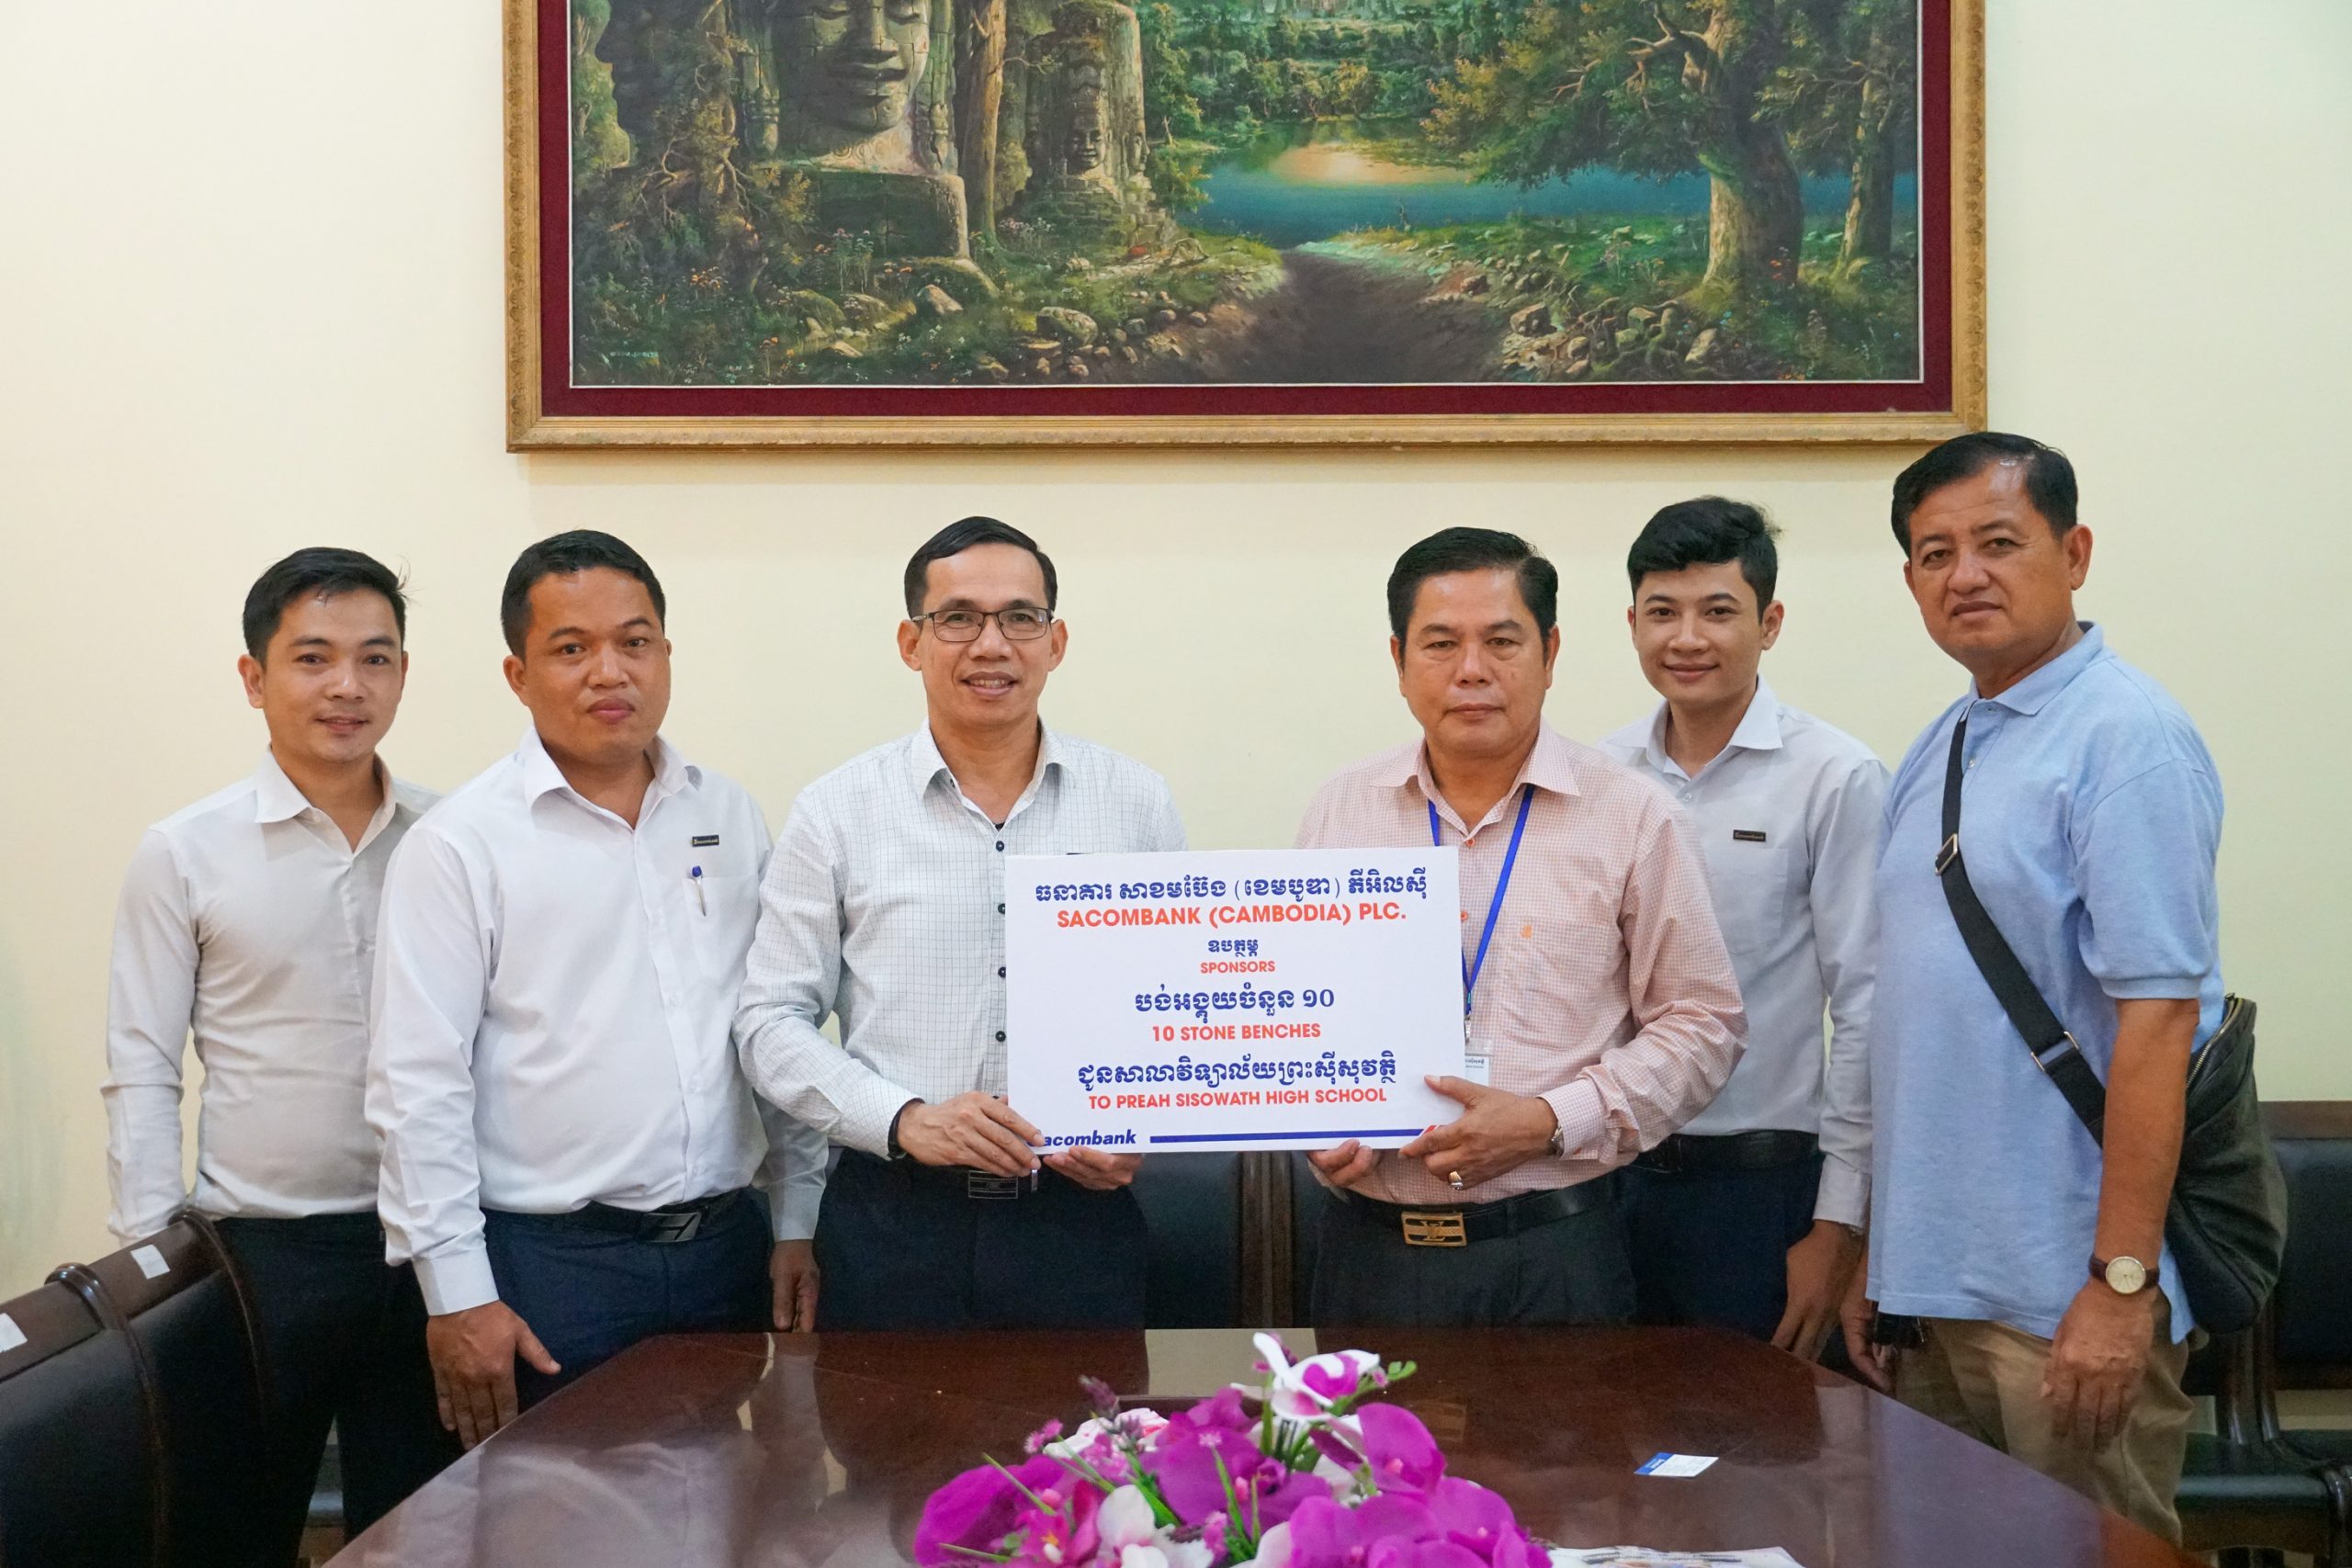 SPONSORS STONE BENCHES FOR PREAH SISOWATH HIGH SCHOOL